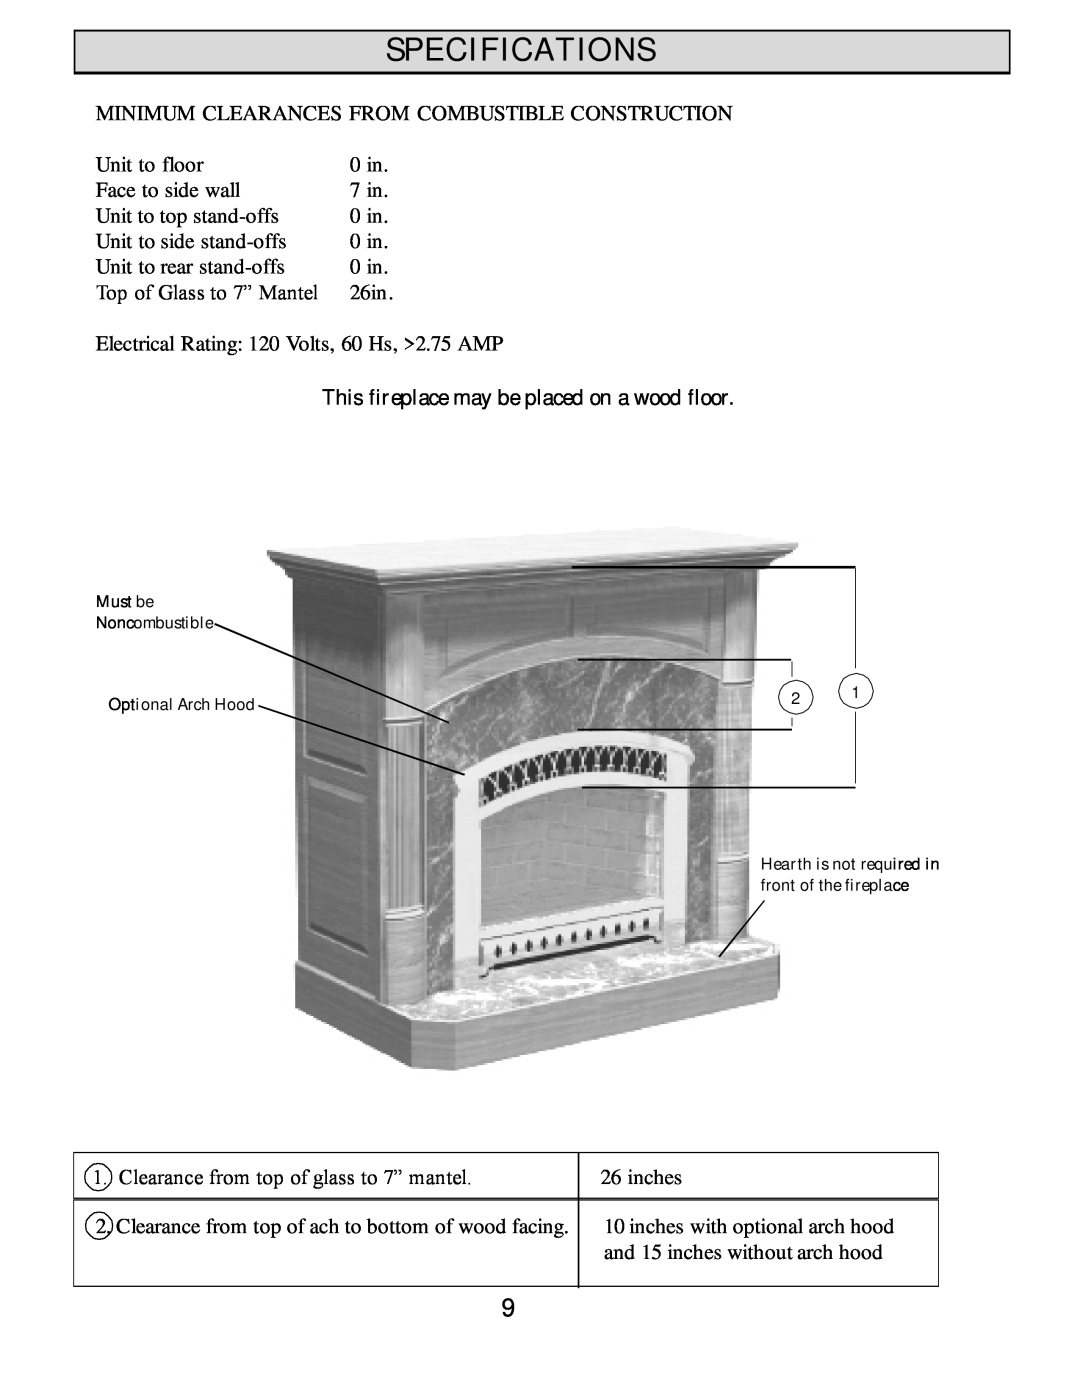 Harman Stove Company HB 38 DV manual This fireplace may be placed on a wood floor, Specifications 